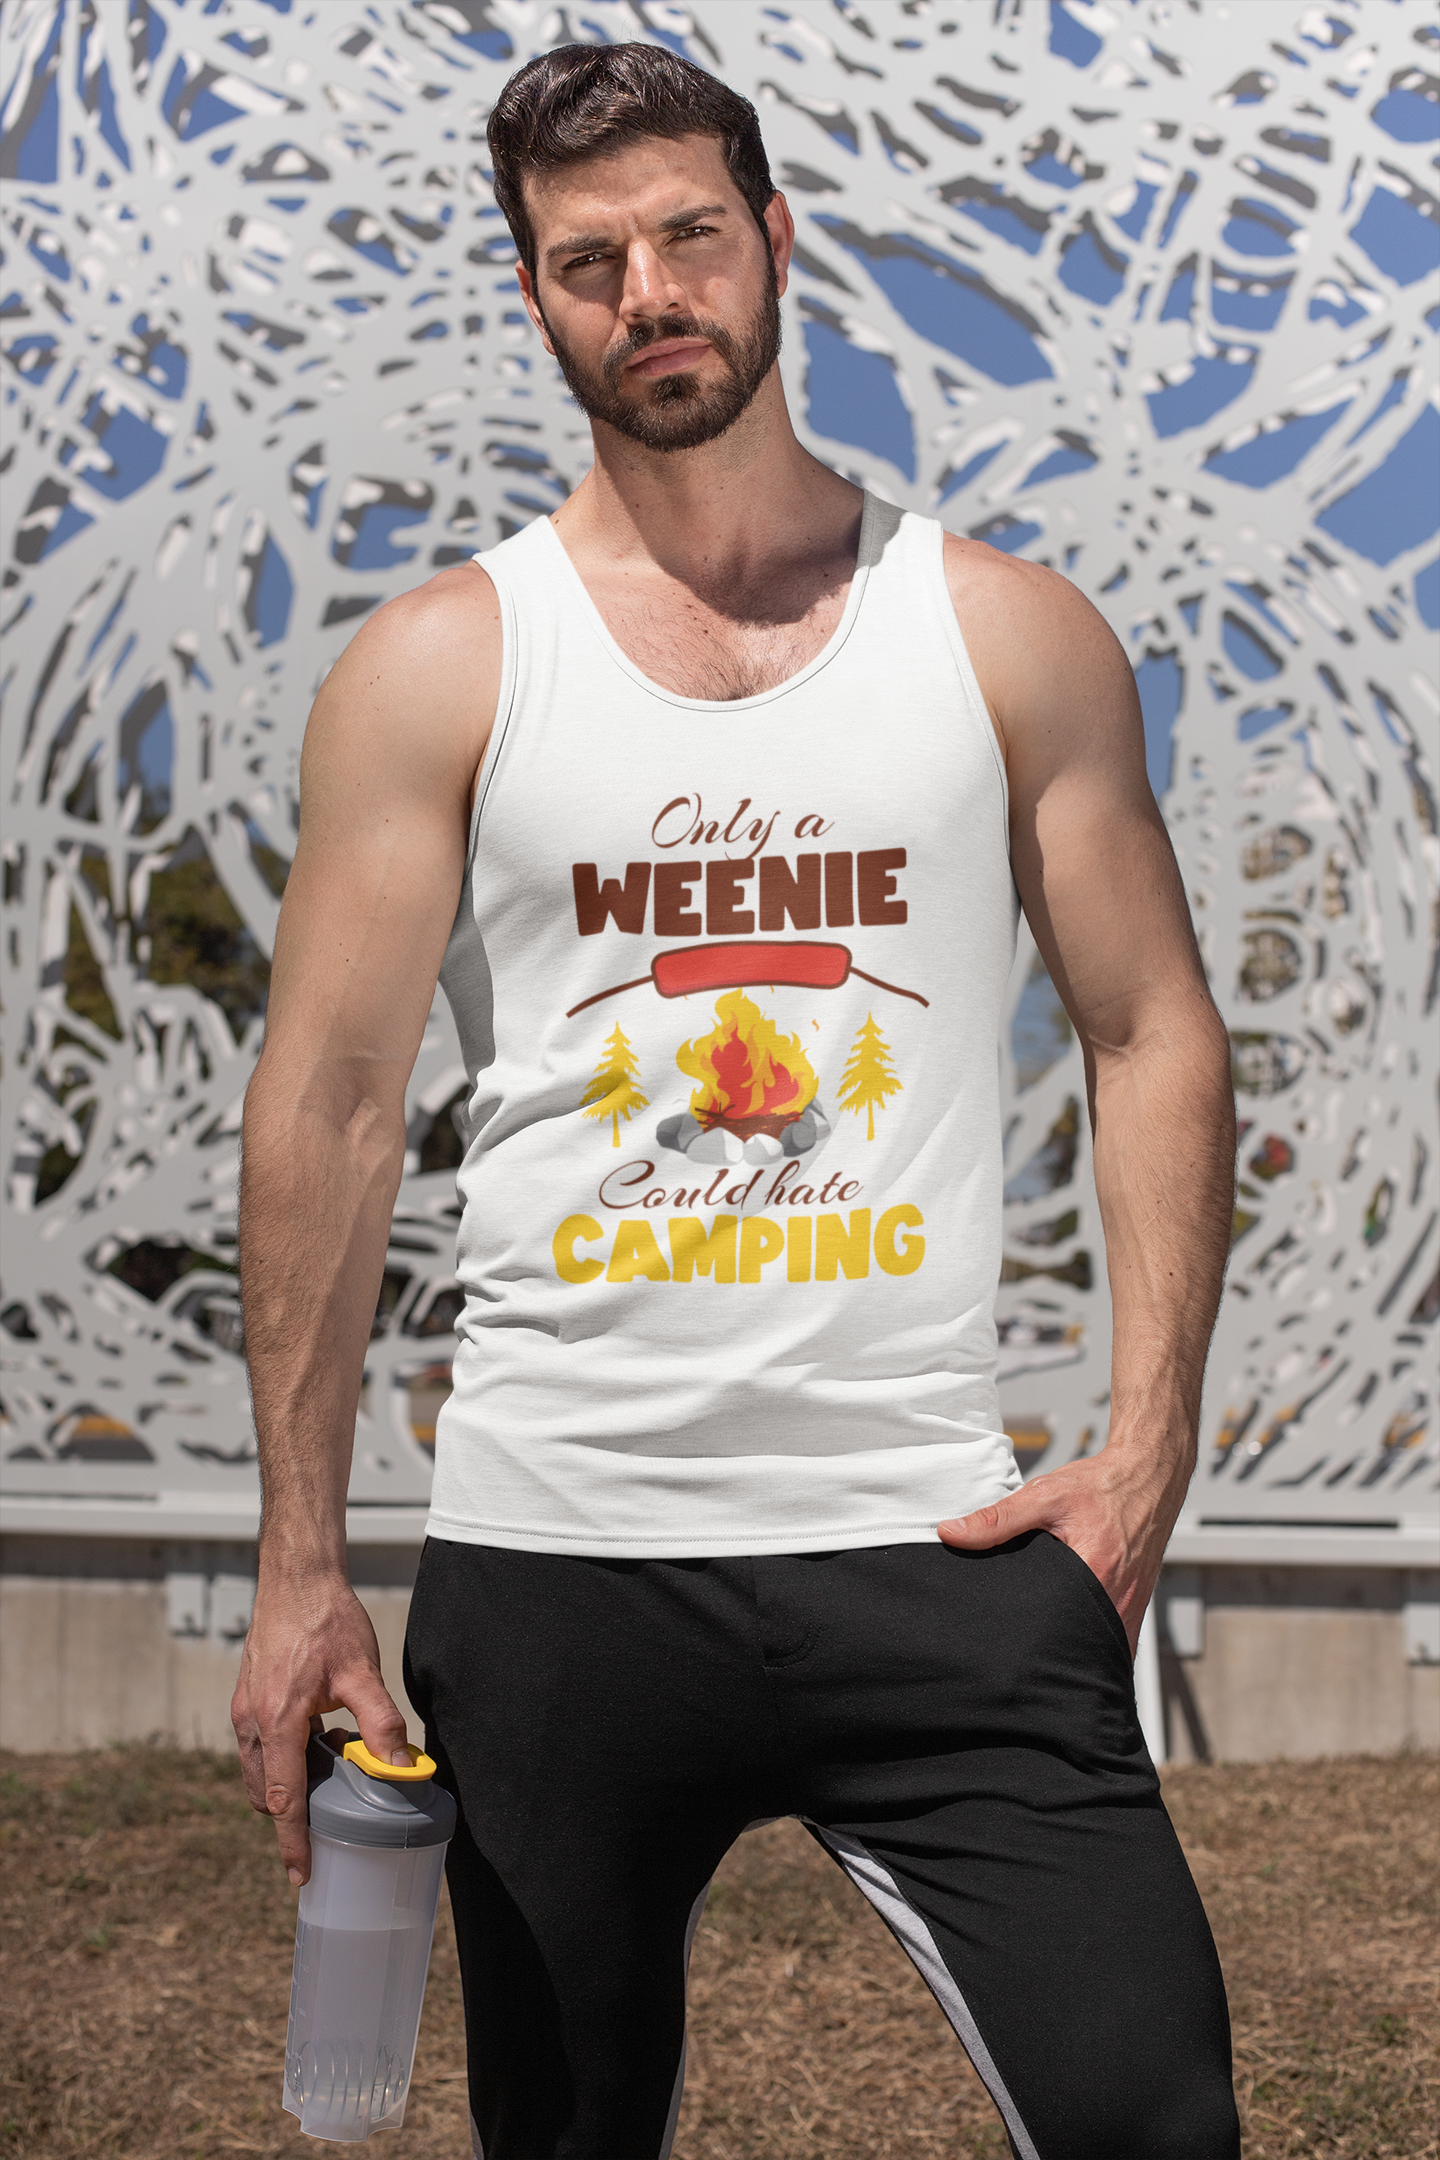 Weenie could hate camping; Soft 100% cotton tank top. Removable tag for comfort